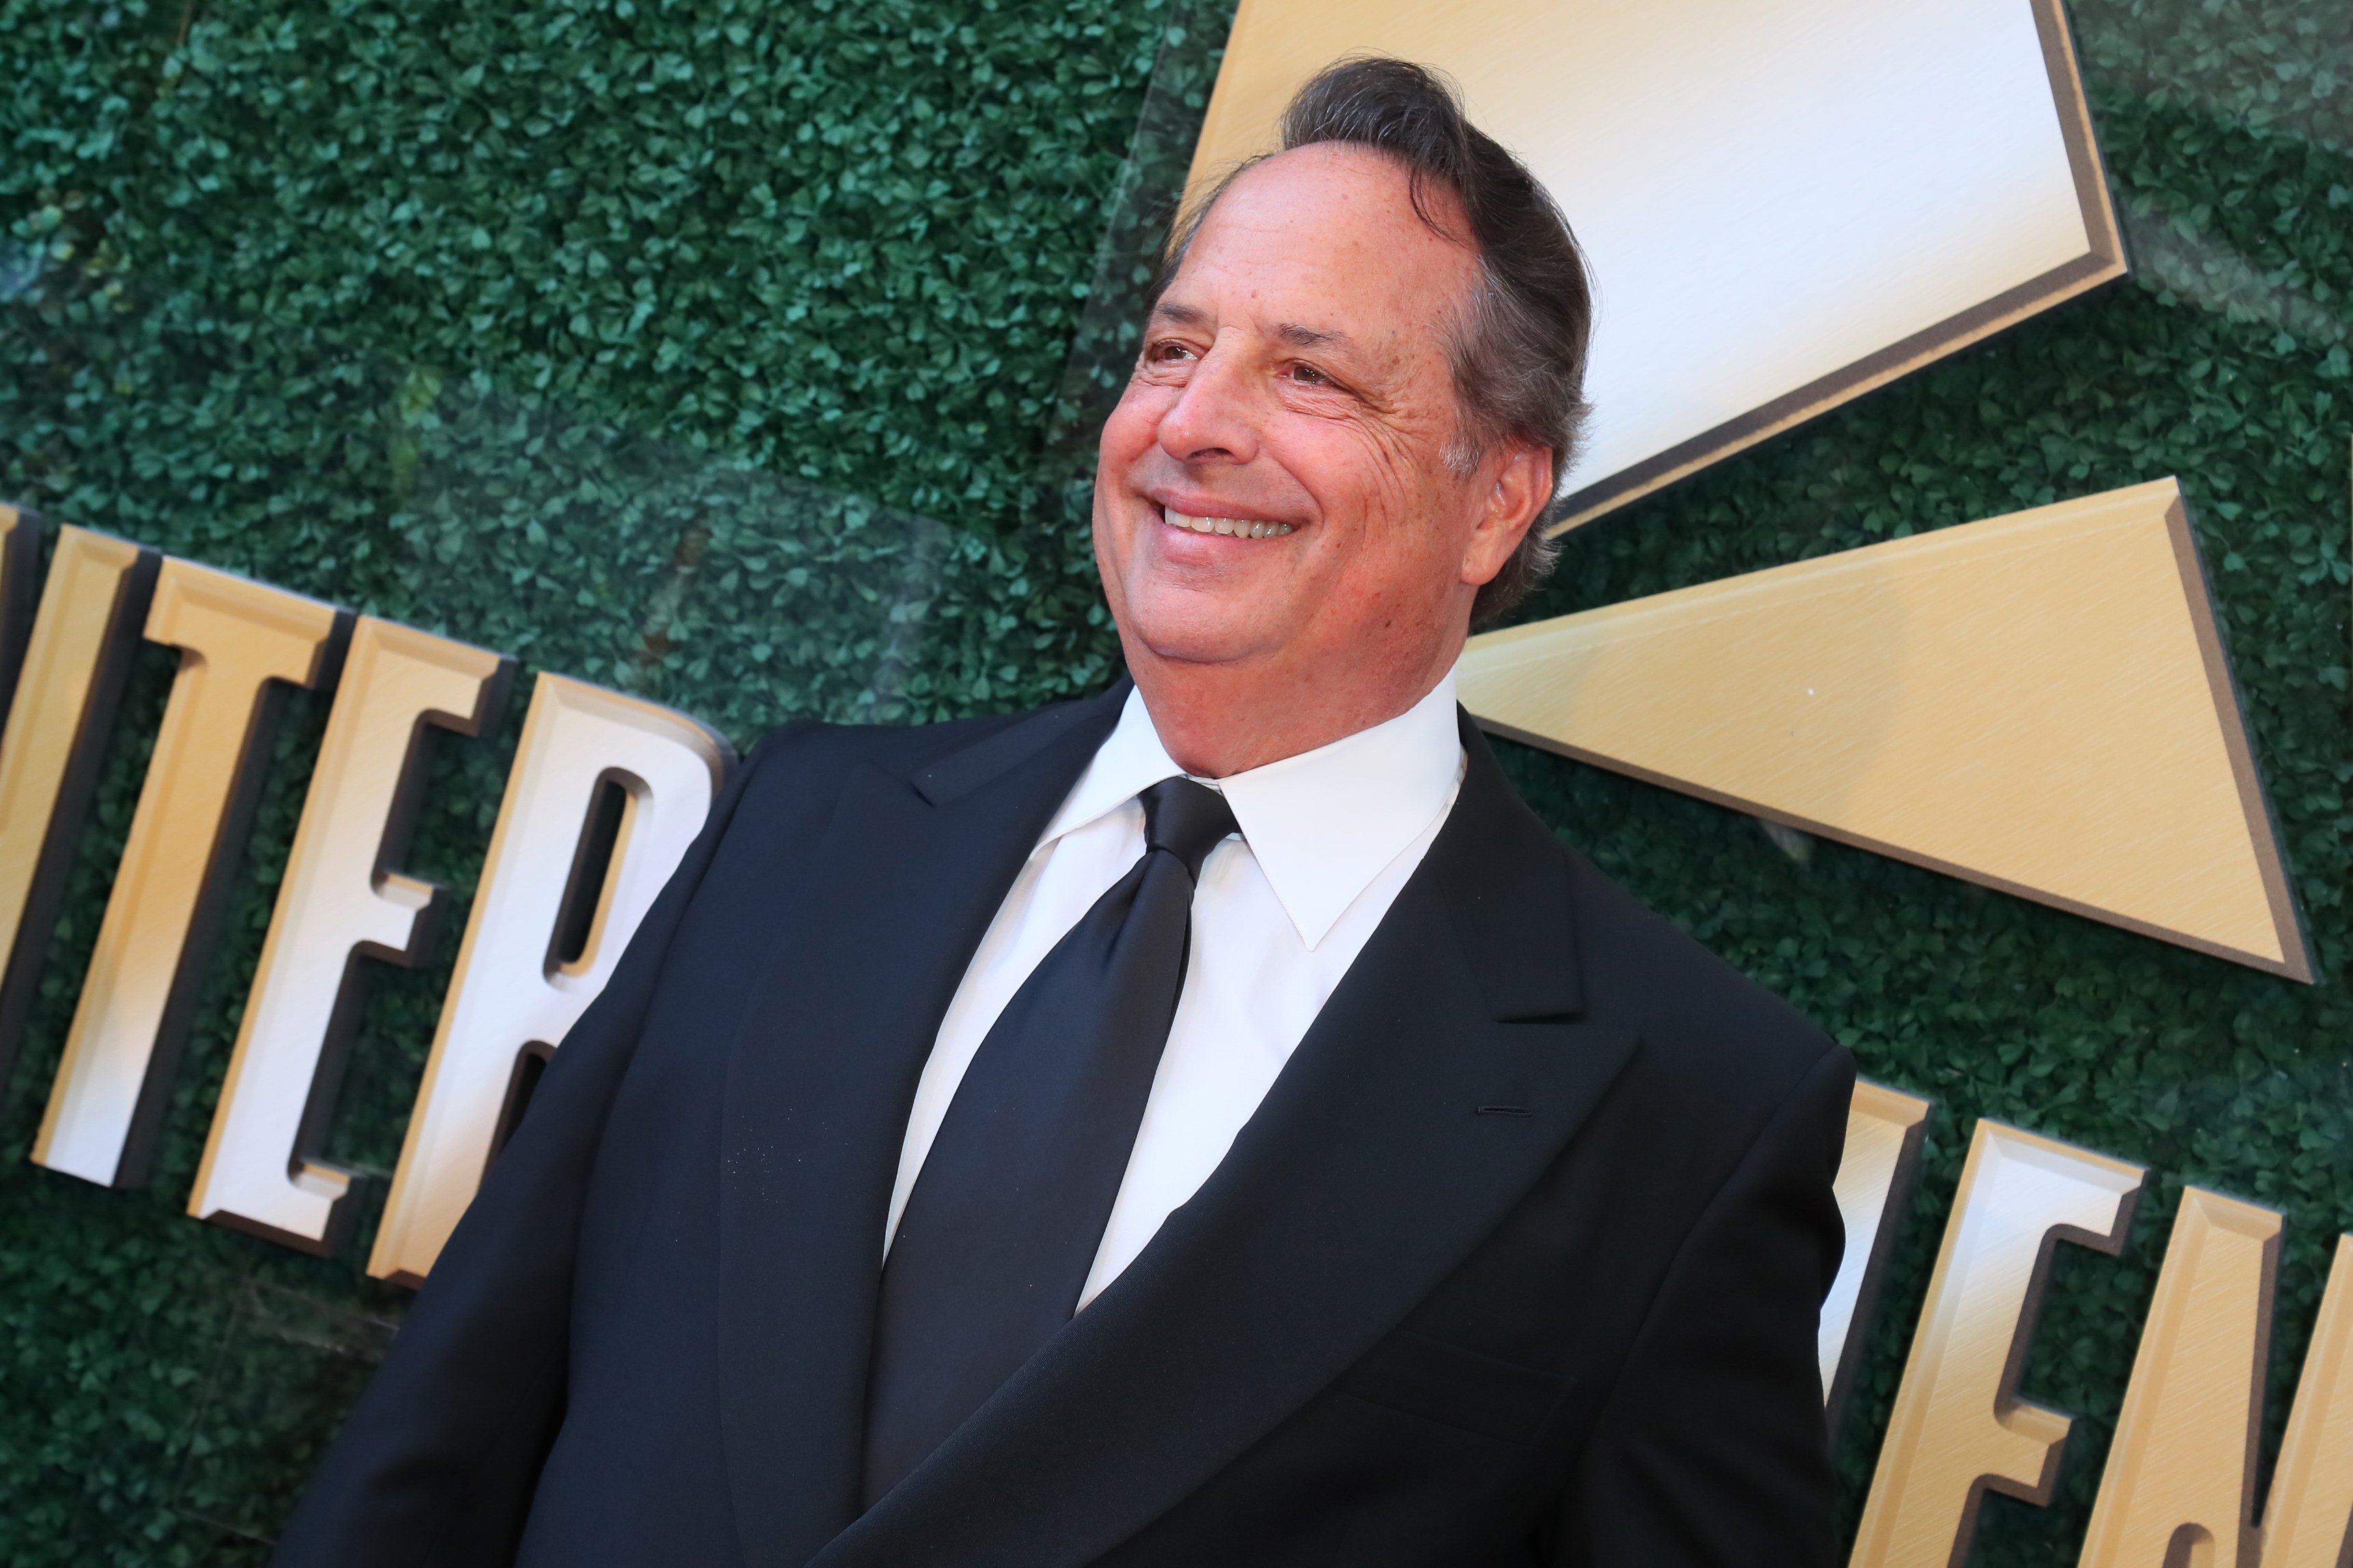 Jon Lovitz during an Oscar viewing and after party at the Beverly Wilshire Four Seasons Hotel on February 24, 2019 in Beverly Hills, California. | Source: Getty Images